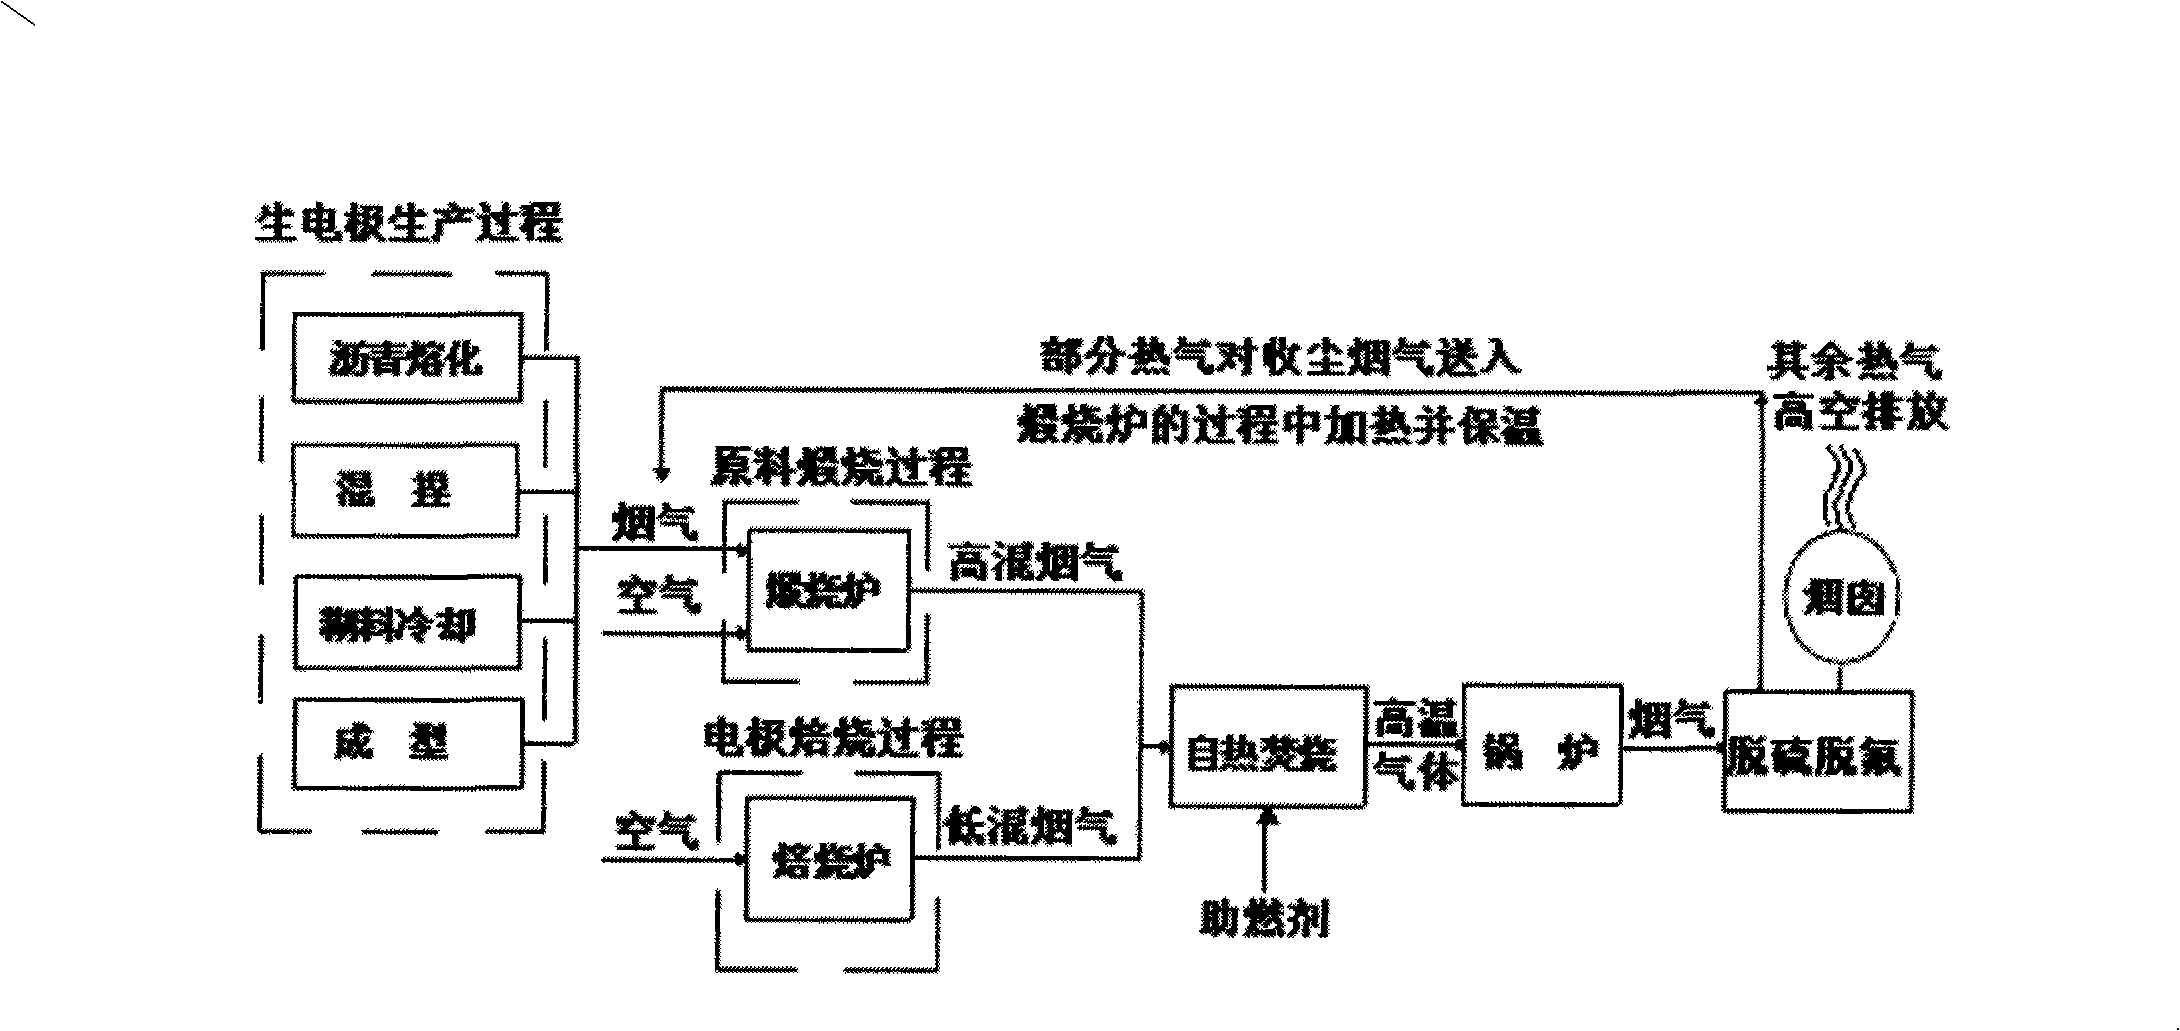 Flue gas cleaning treatment method during producing carbon product